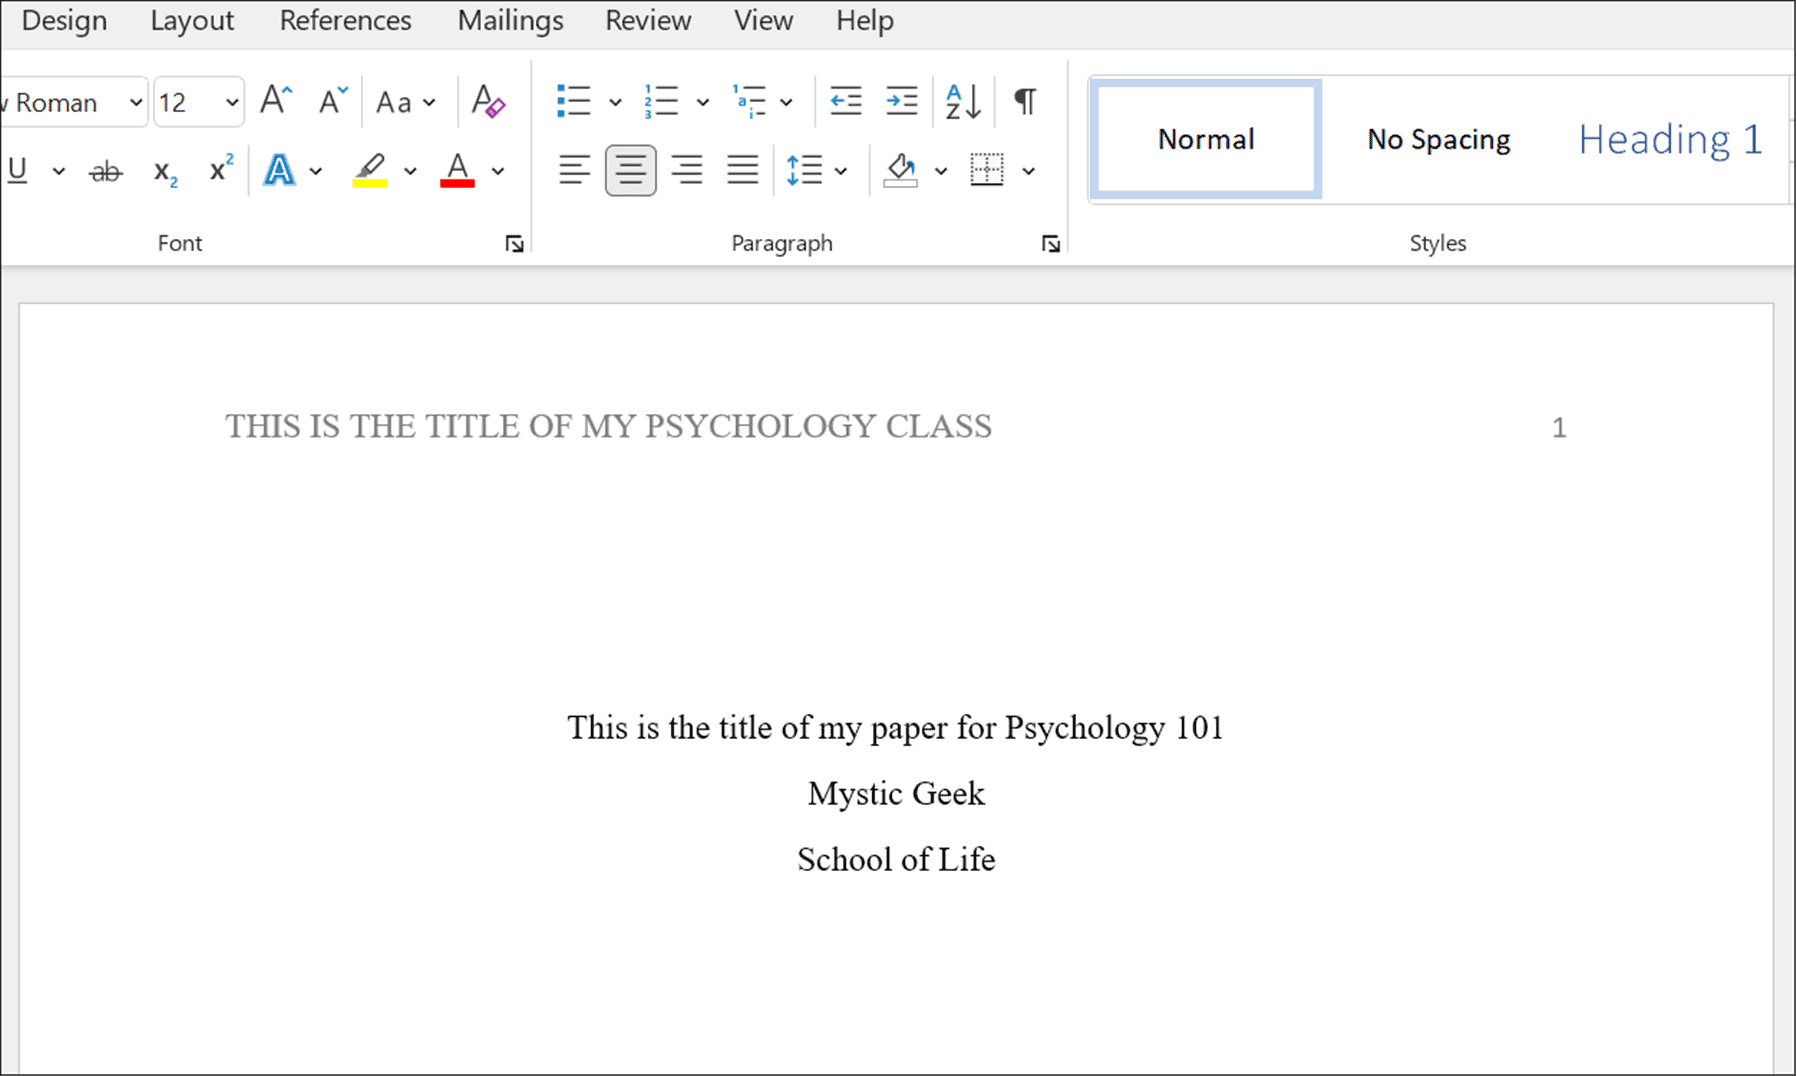 How to Format Apa Style in Microsoft Word?